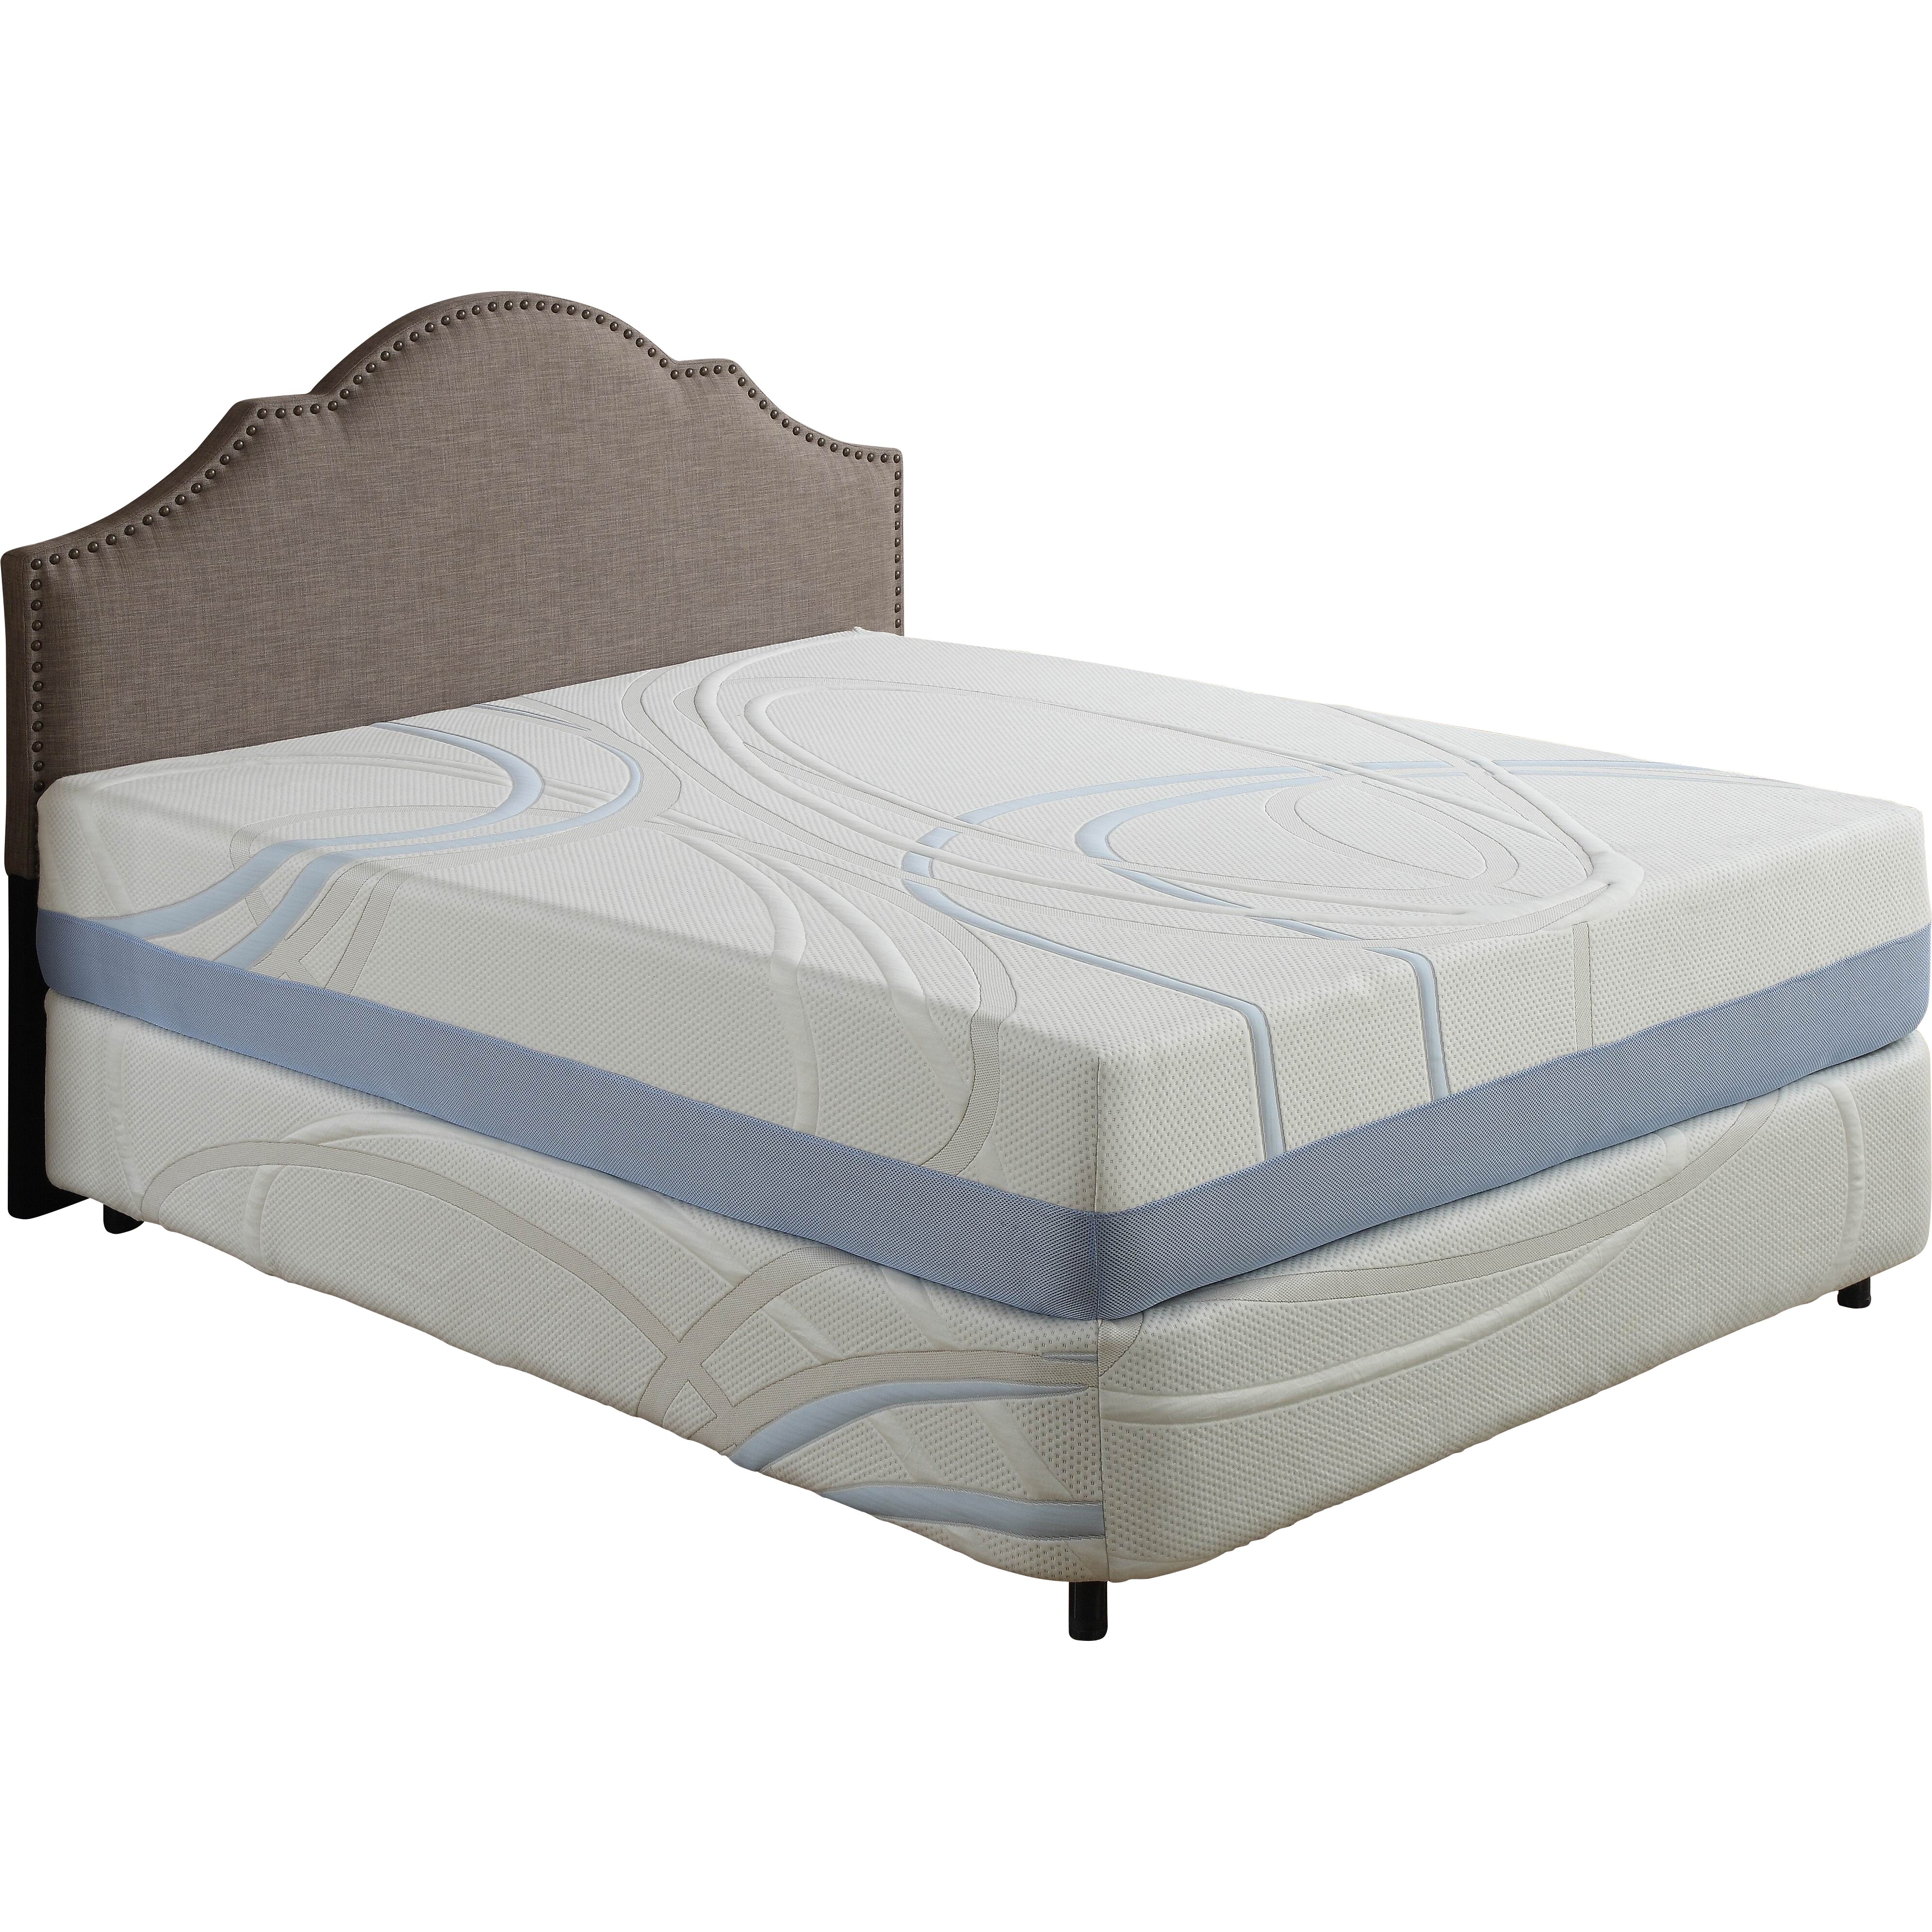 Are reviews for Sleep Country mattresses generally positive?